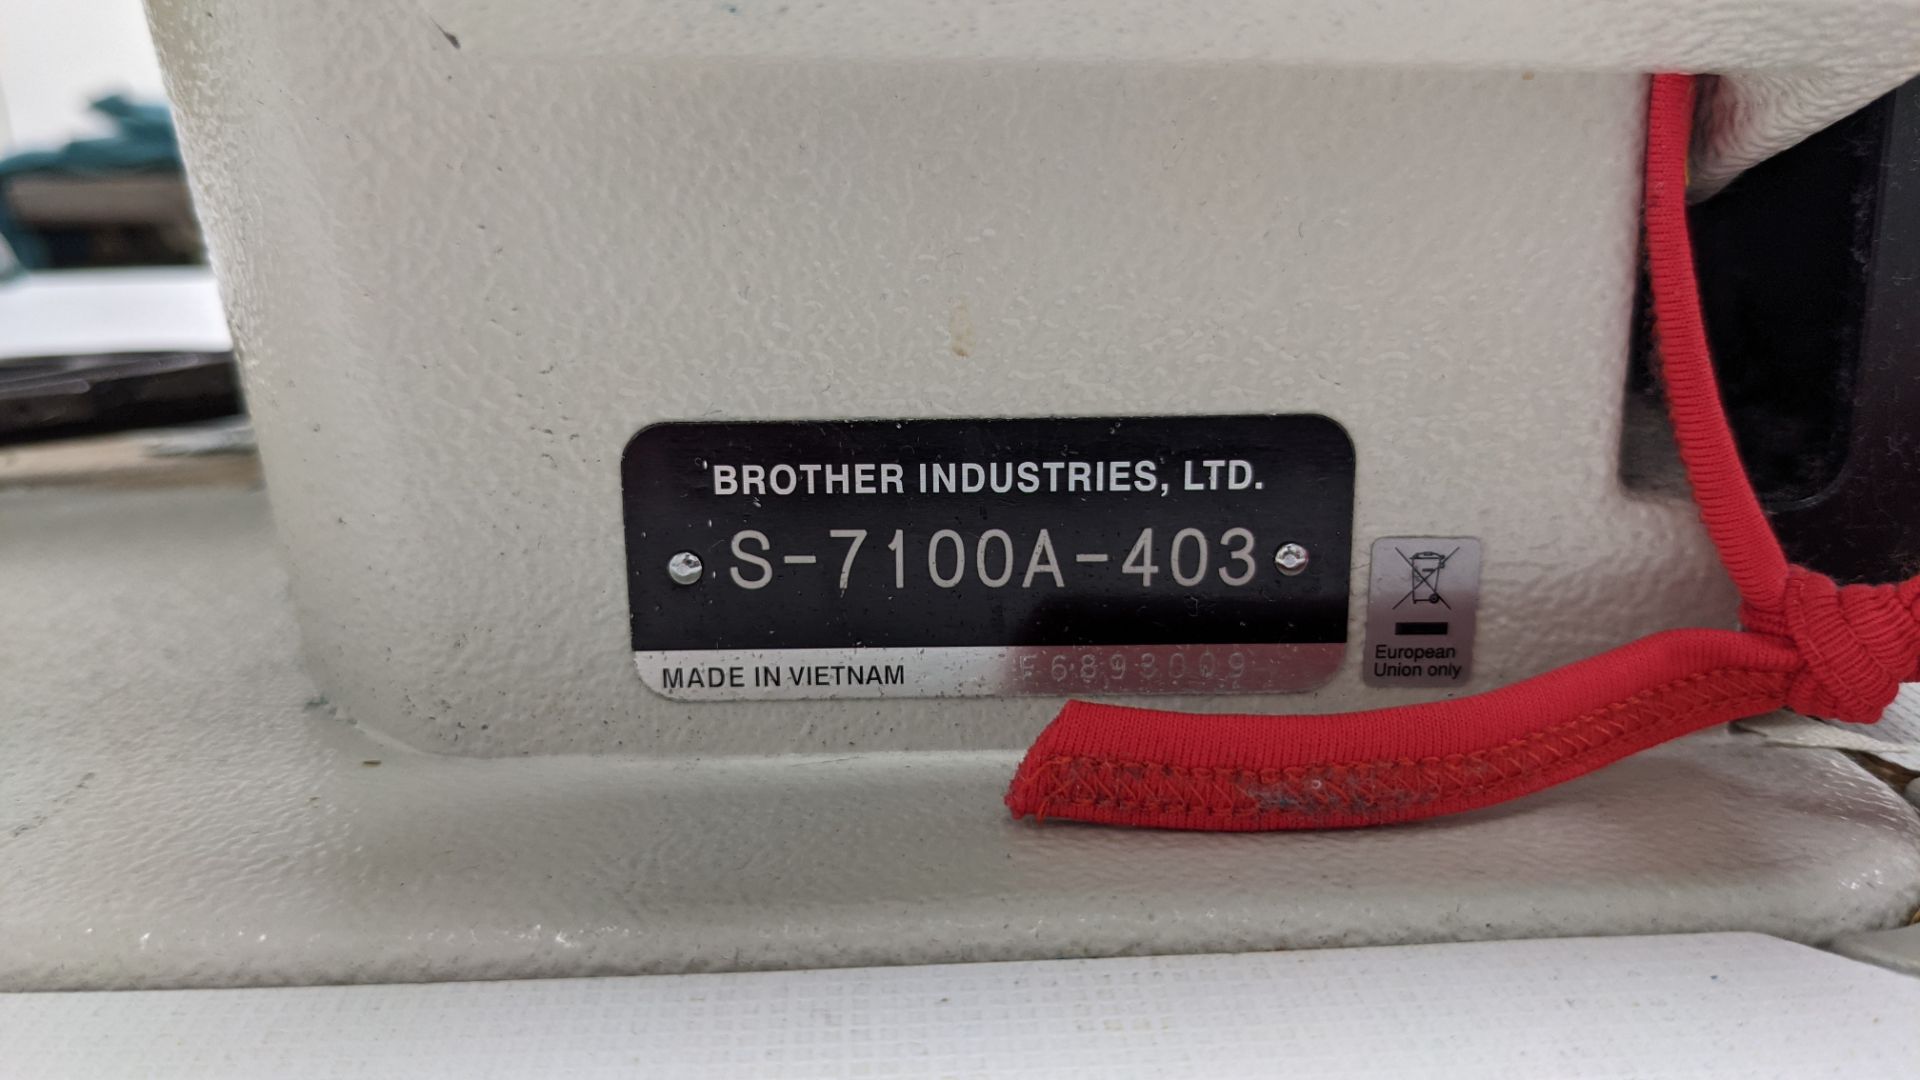 Brother S-7100A-403 Direct Drive (UBT) Lockstitch Sewing Machine - Image 4 of 4